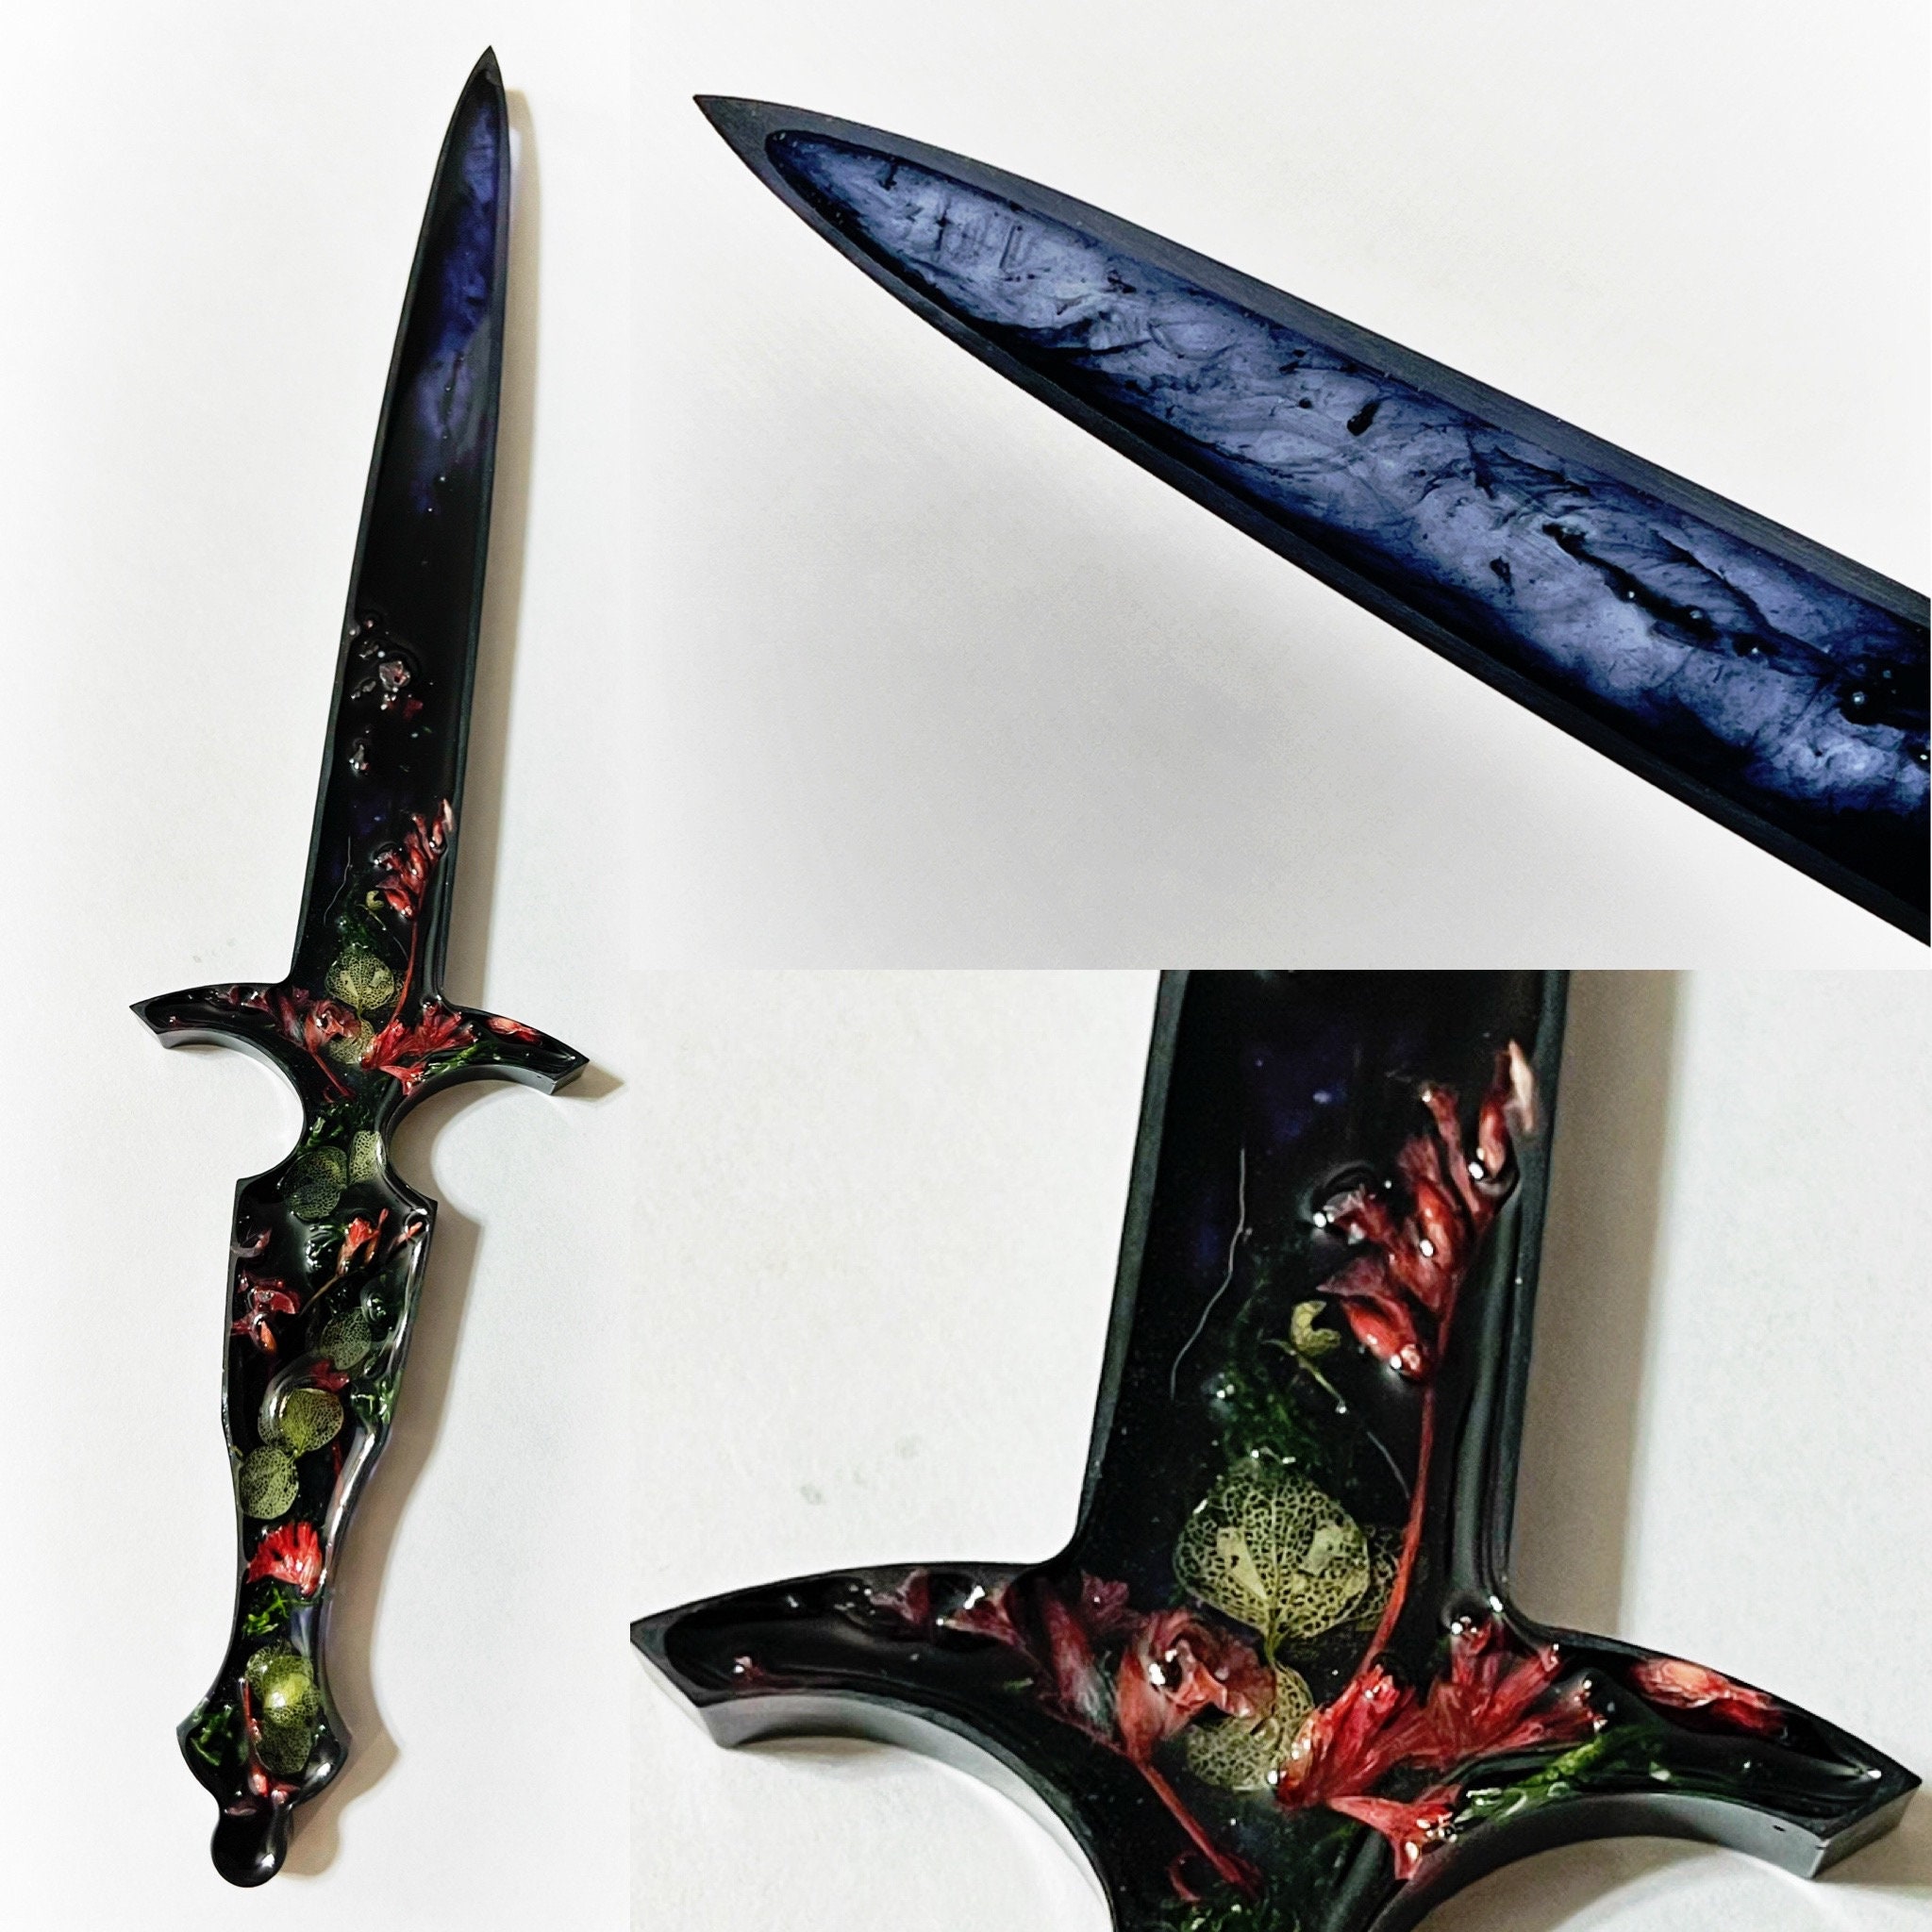 Large Custom Decorative Dried Pressed Flower Floral Blade Kitchen Knife,  One Sided or Double Sided Design Unique Home Decor 4 Styles 